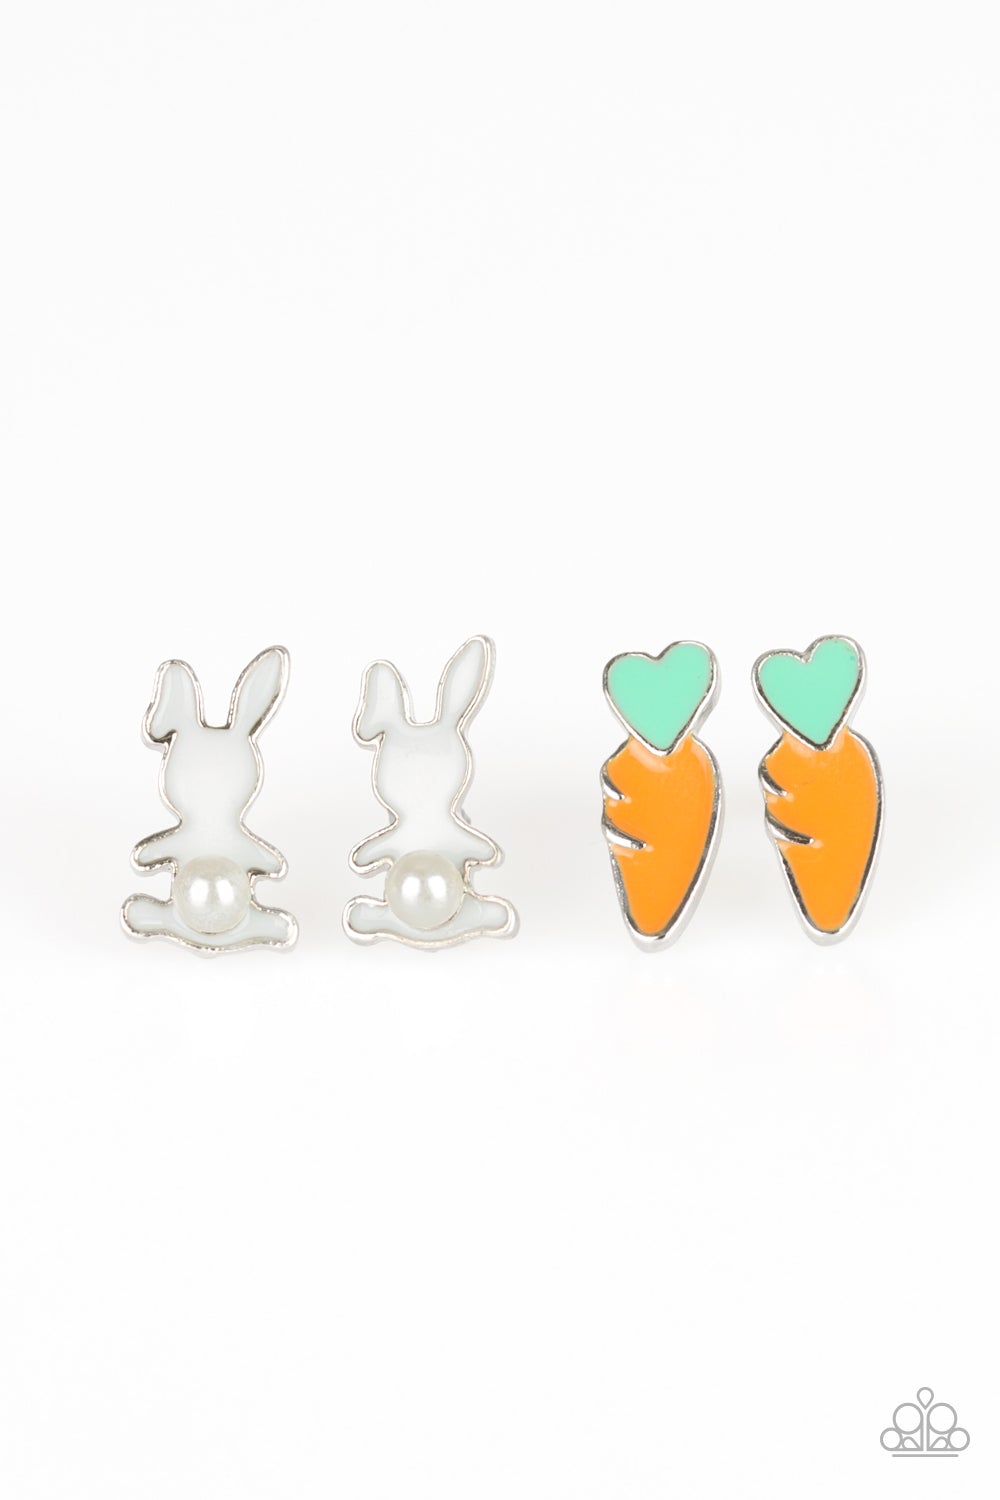 Paparazzi Accessories - EASTER BUNNY EGG CHICK CARROT PEARL & RHINESTONE #SS12 - Starlet Shimmer Earrings